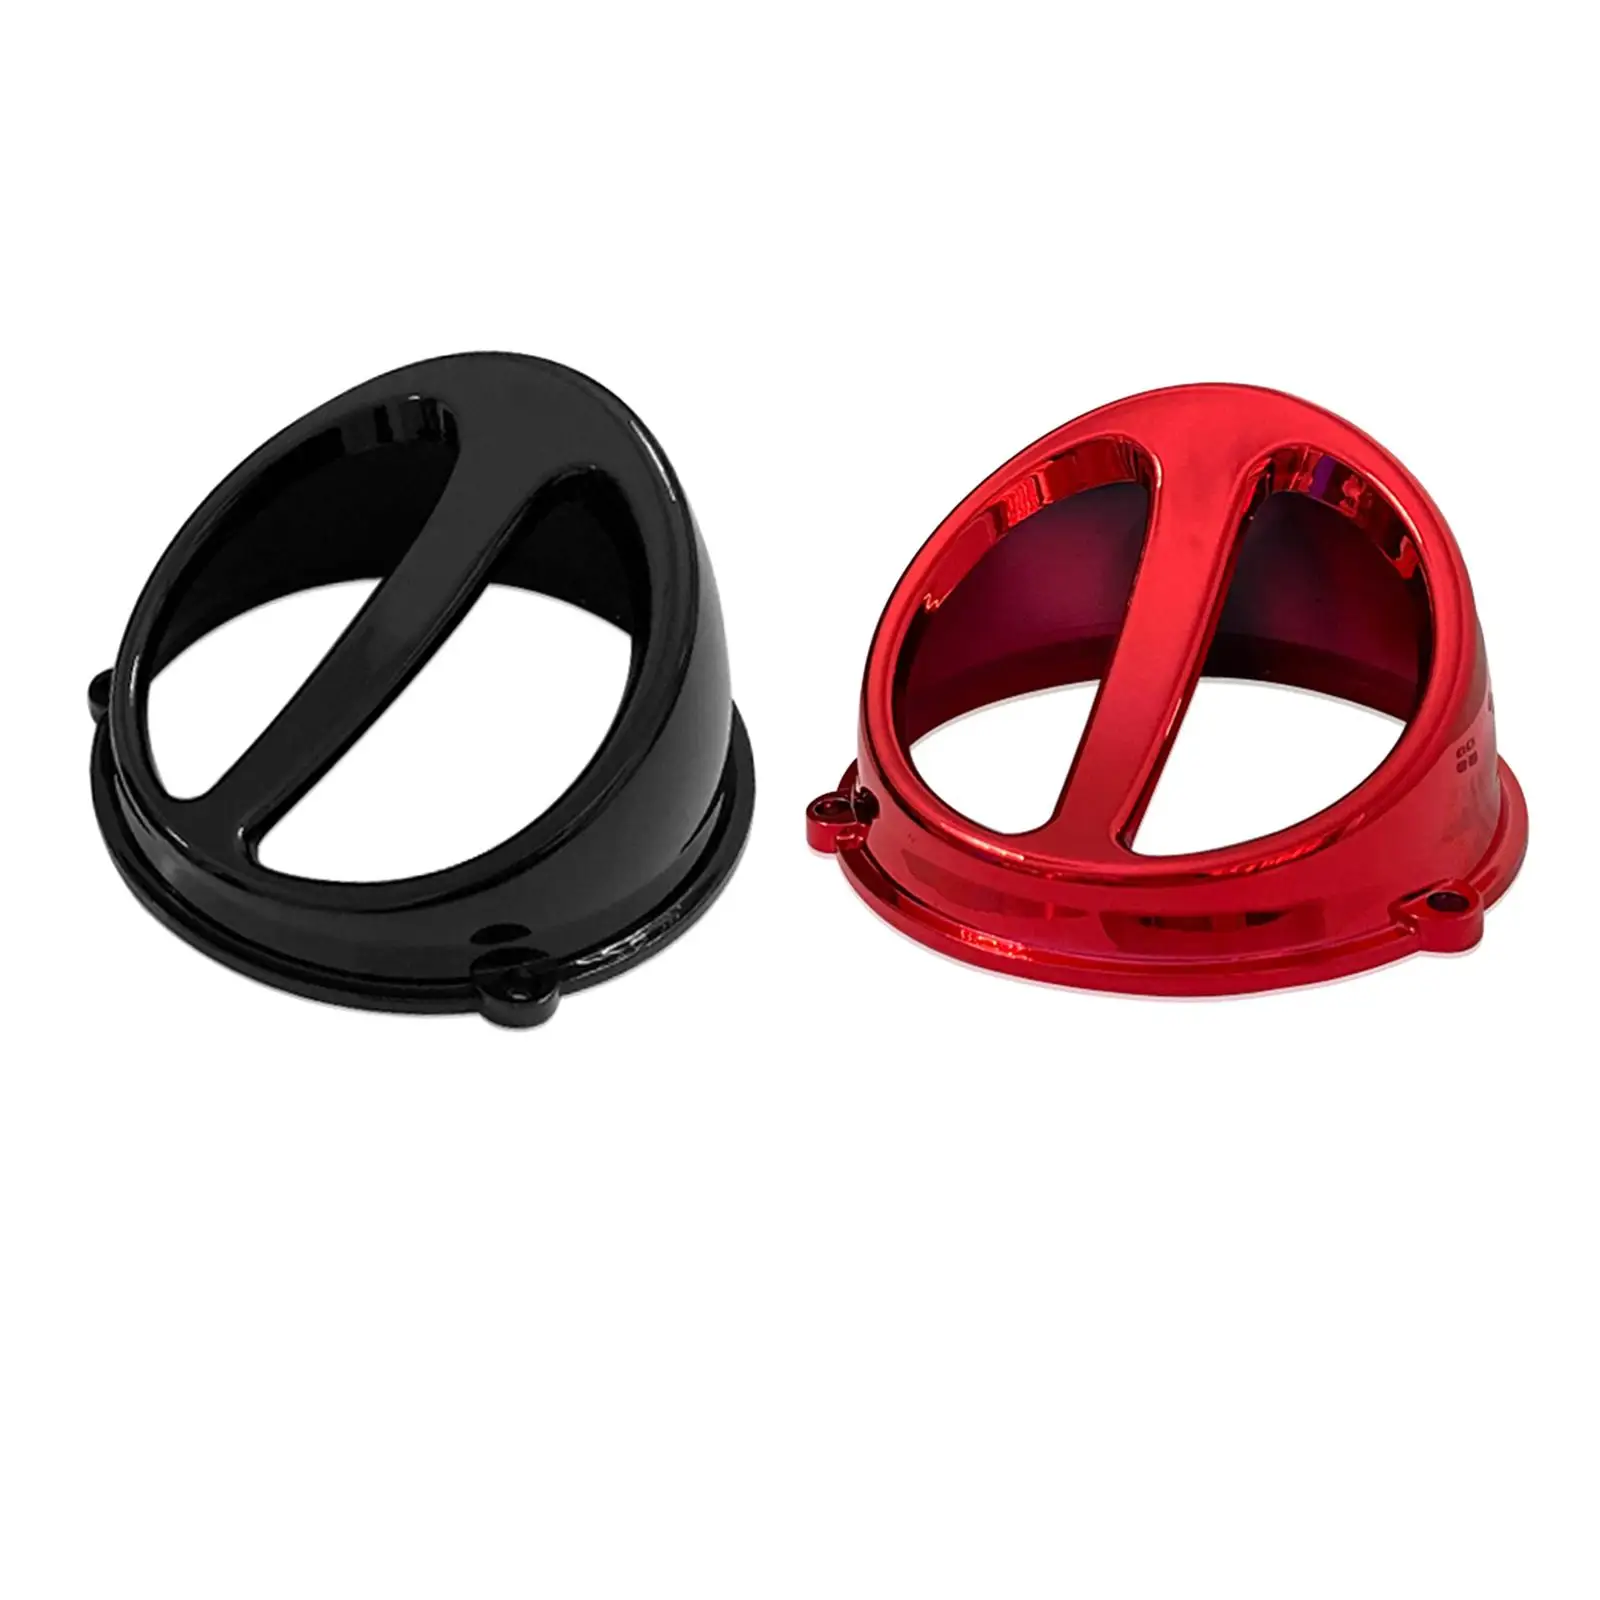 

Scooter Fan Cover Air Engine Cooling System for JOG50 90 DIO ZX GY6 GY6 for Motorcycle 125cc 150cc Chinese Scooter 152QMI 157QMJ